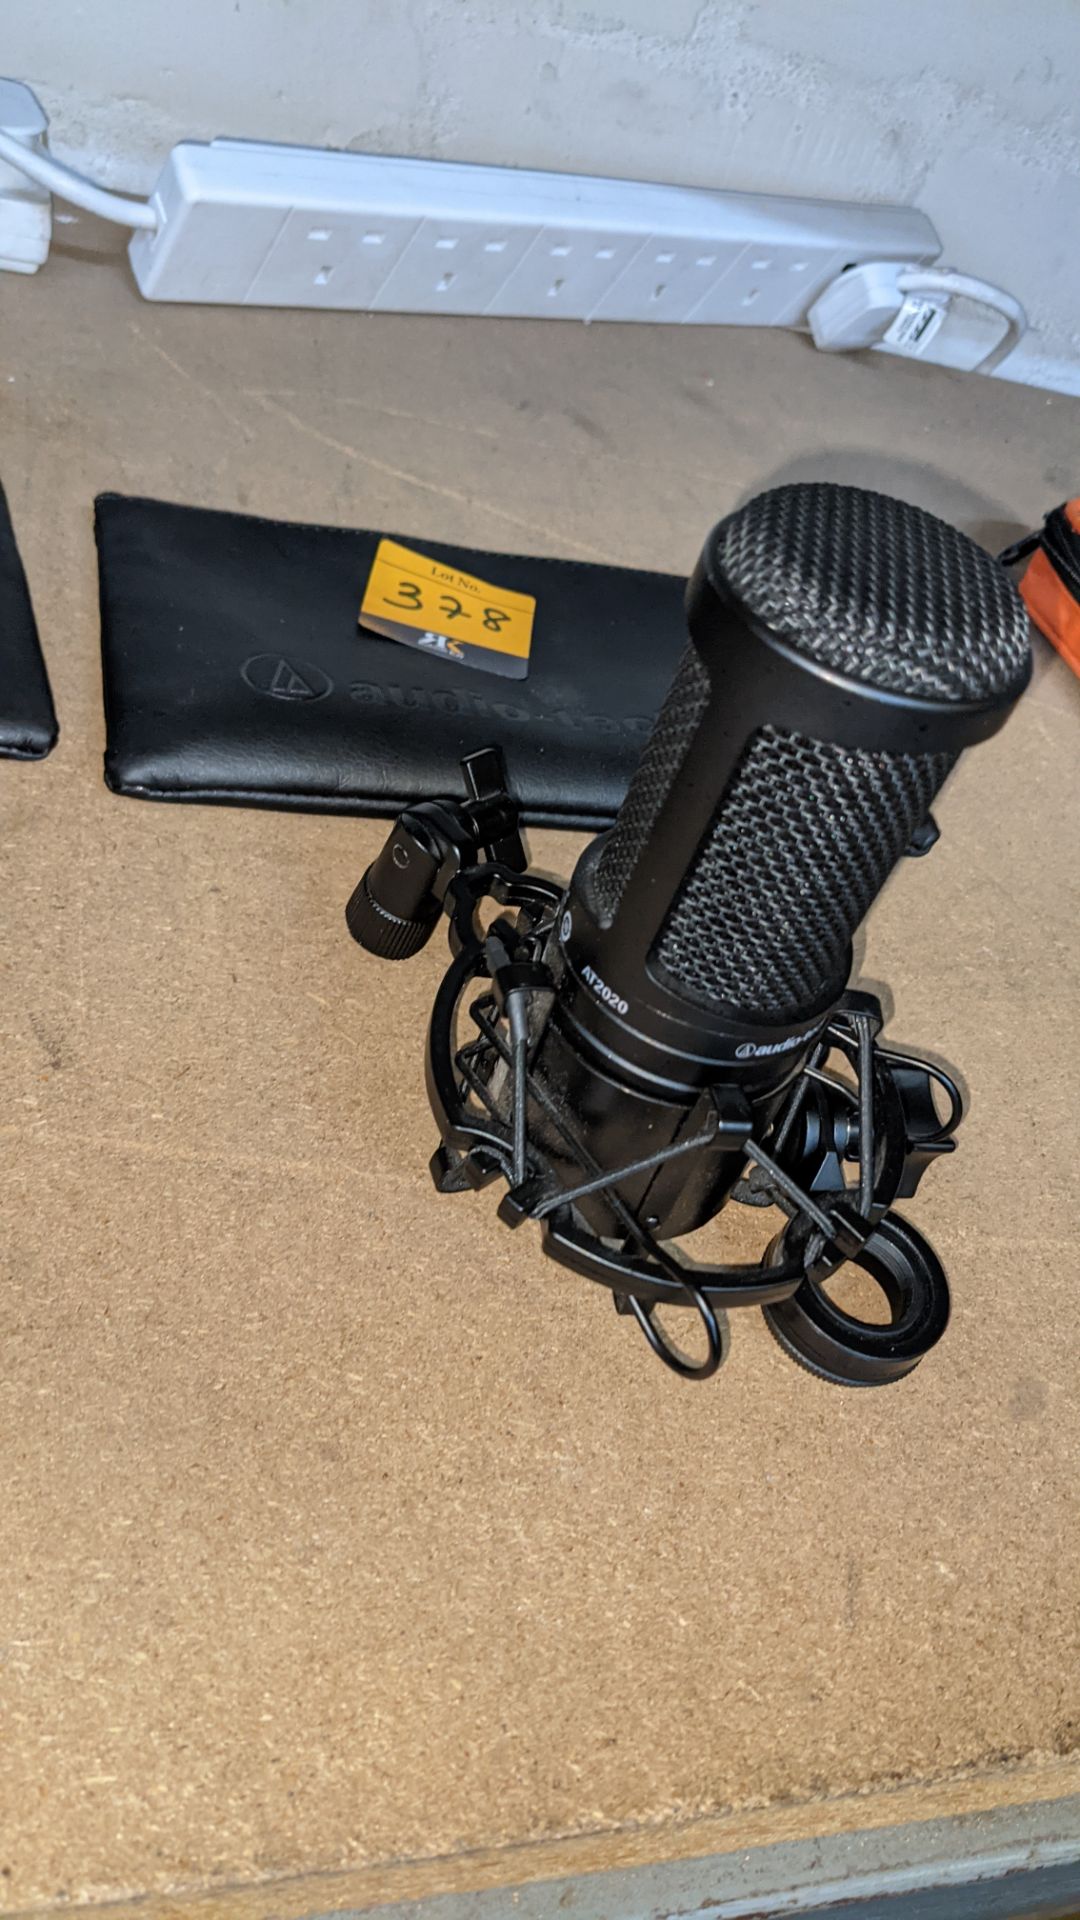 Audio Technica AT2020 P48 Cardioid condenser microphone with case & ancillaries as pictured